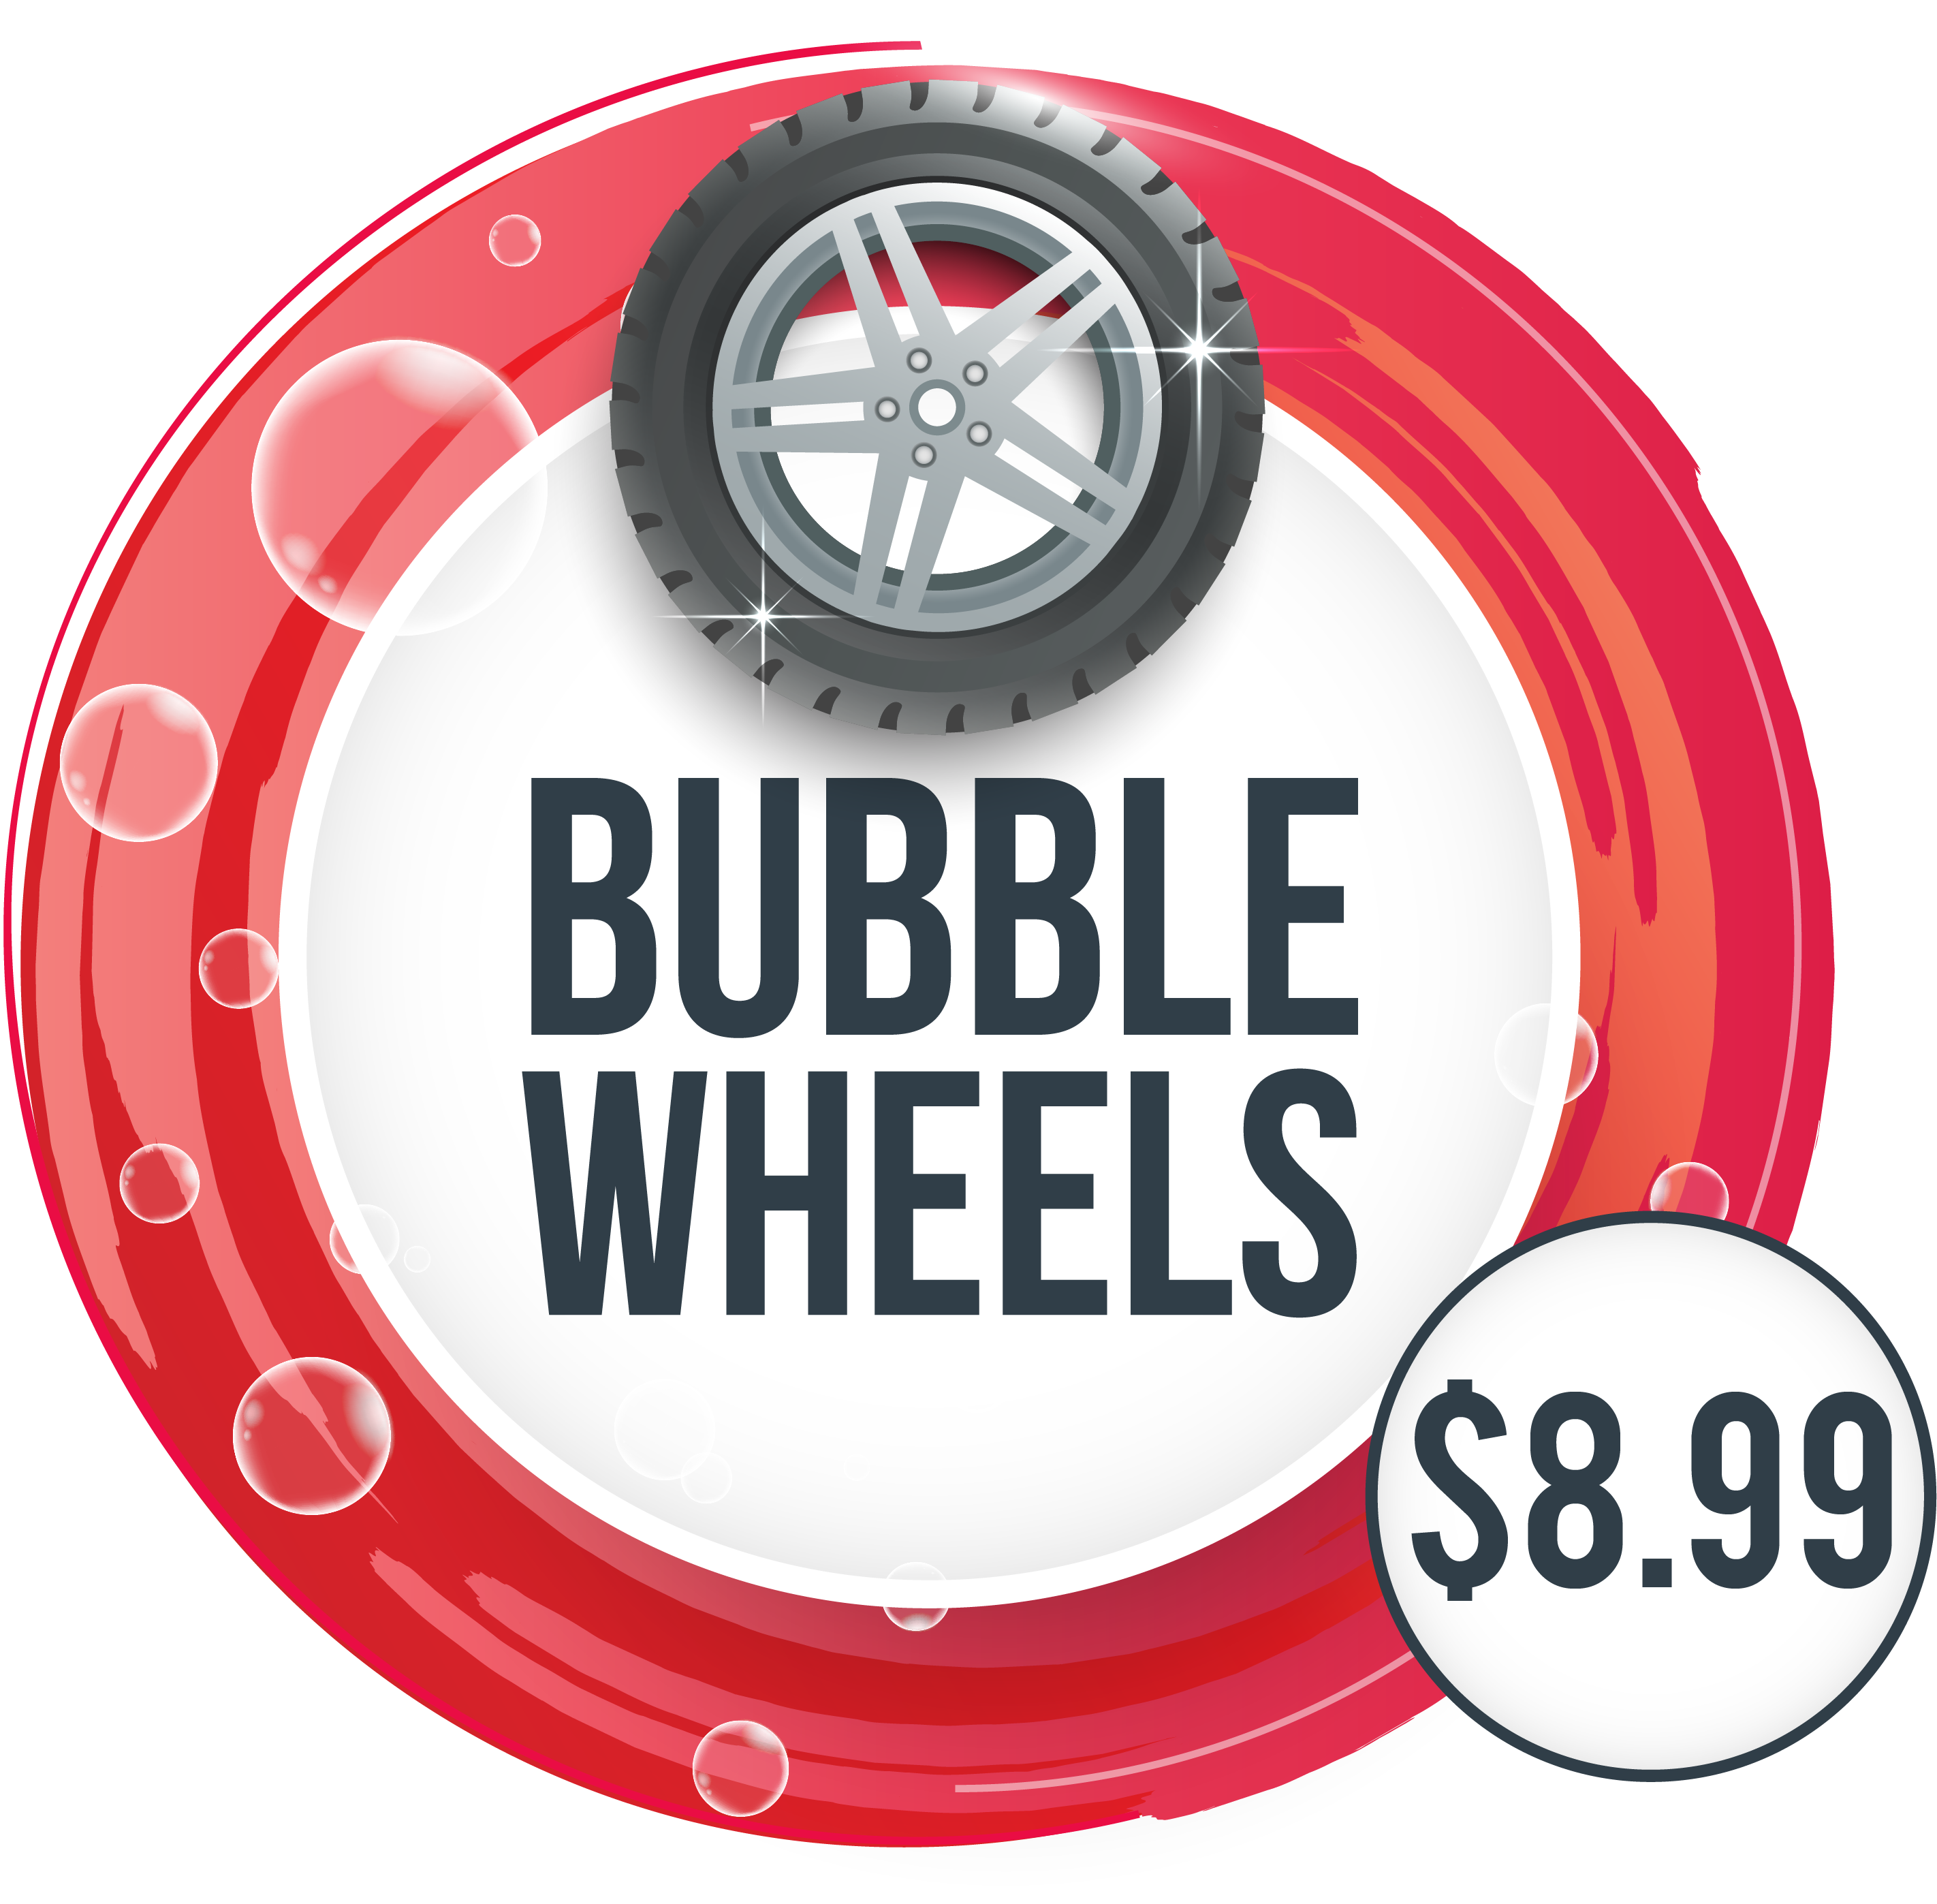 A Red And White Circle With A Tire And Bubbles On It